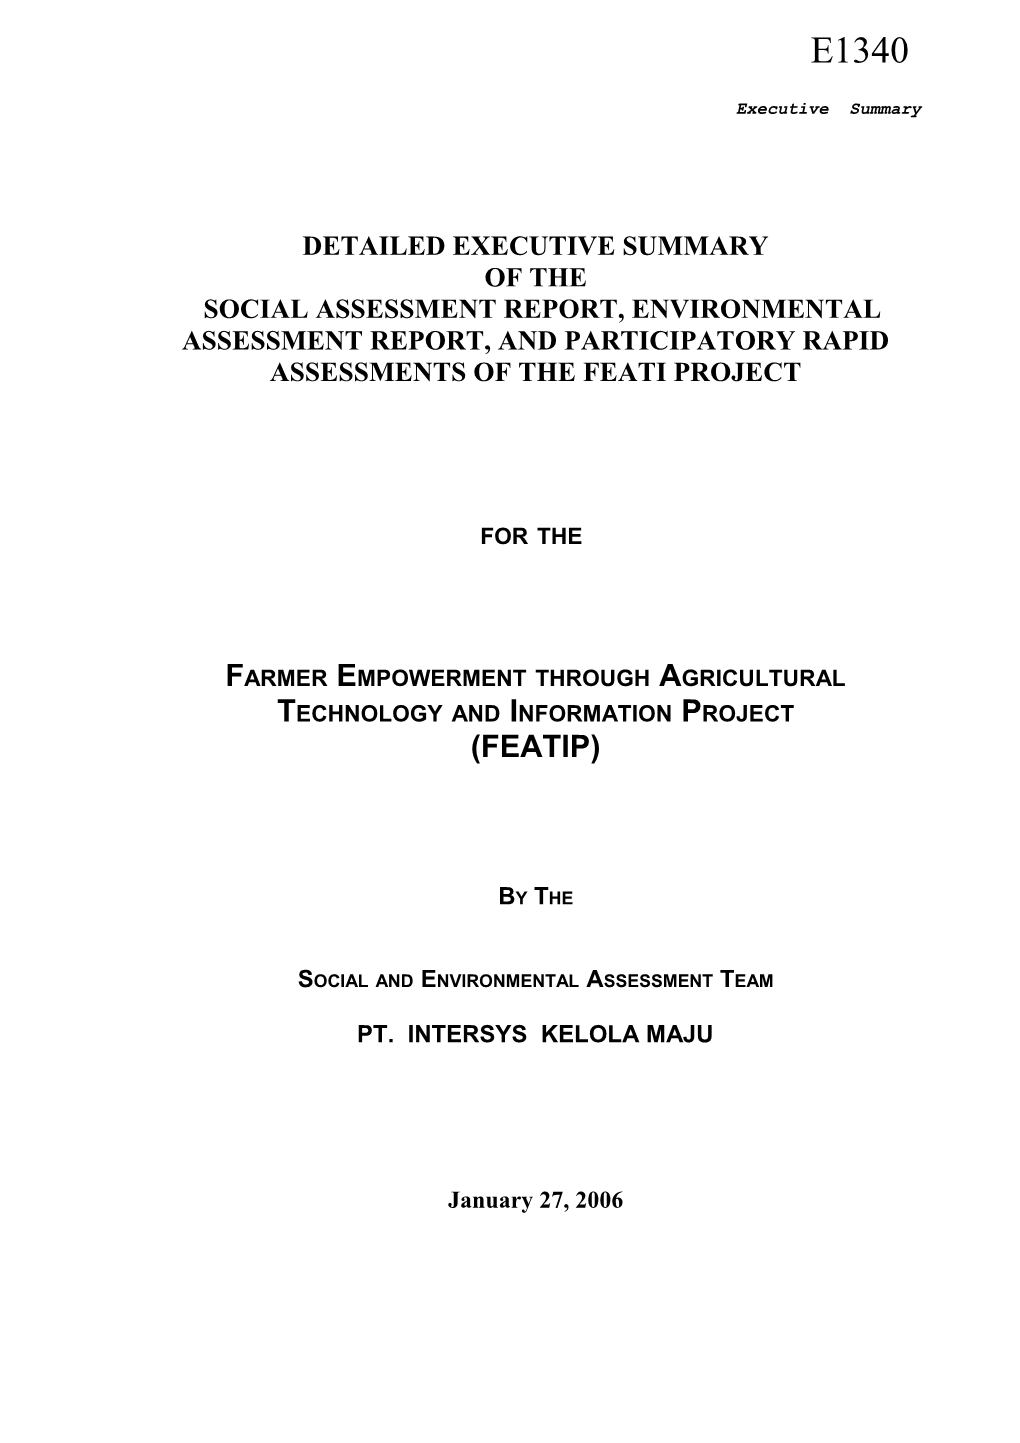 Detailed Executive Summary of the Social Assessment Report, the Environmental Assessment